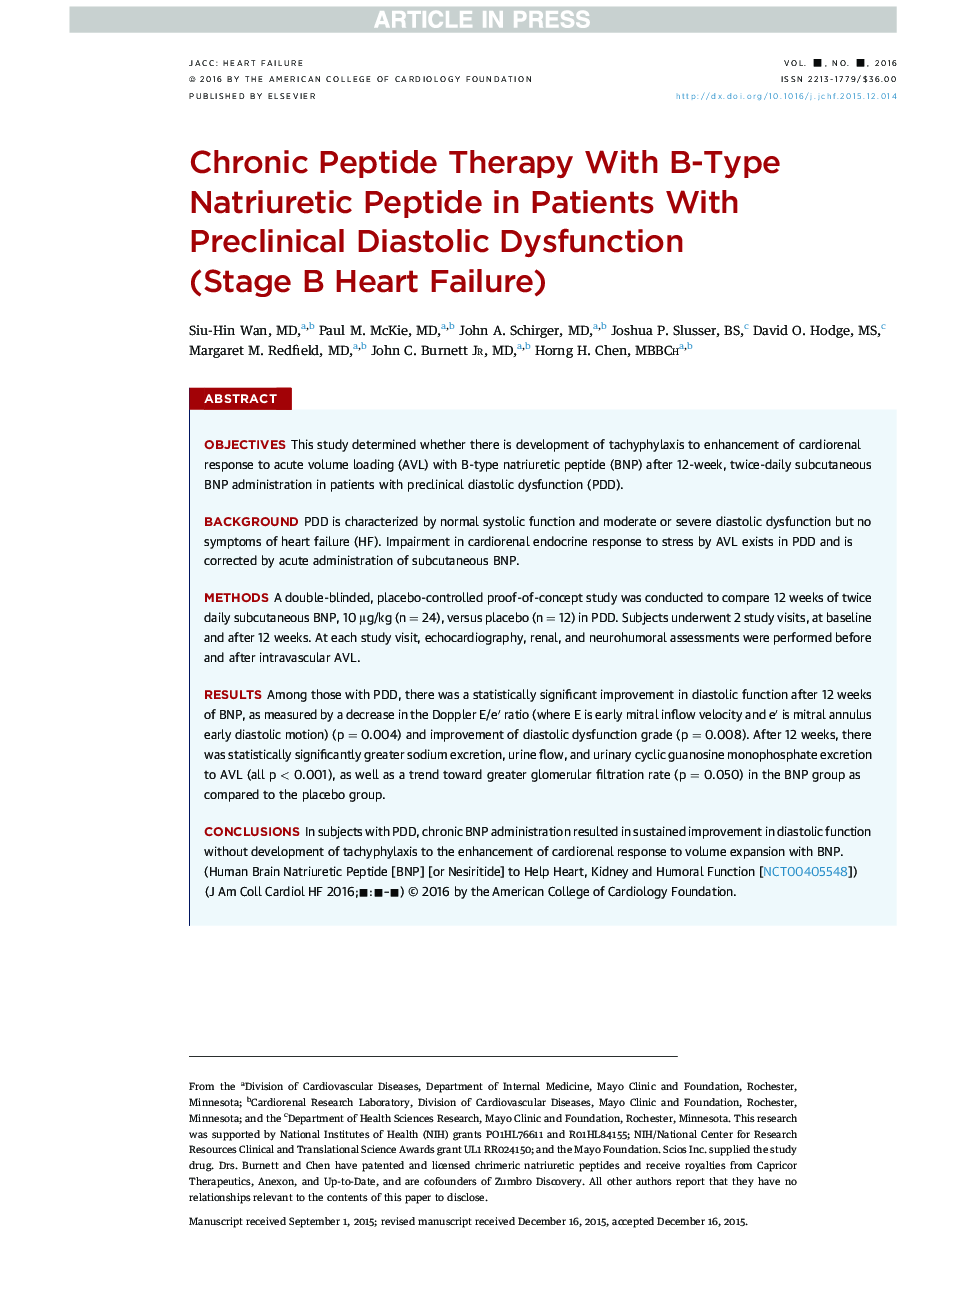 Chronic Peptide Therapy With B-Type Natriuretic Peptide in Patients With Pre-Clinical Diastolic Dysfunction (StageÂ BÂ Heart Failure)